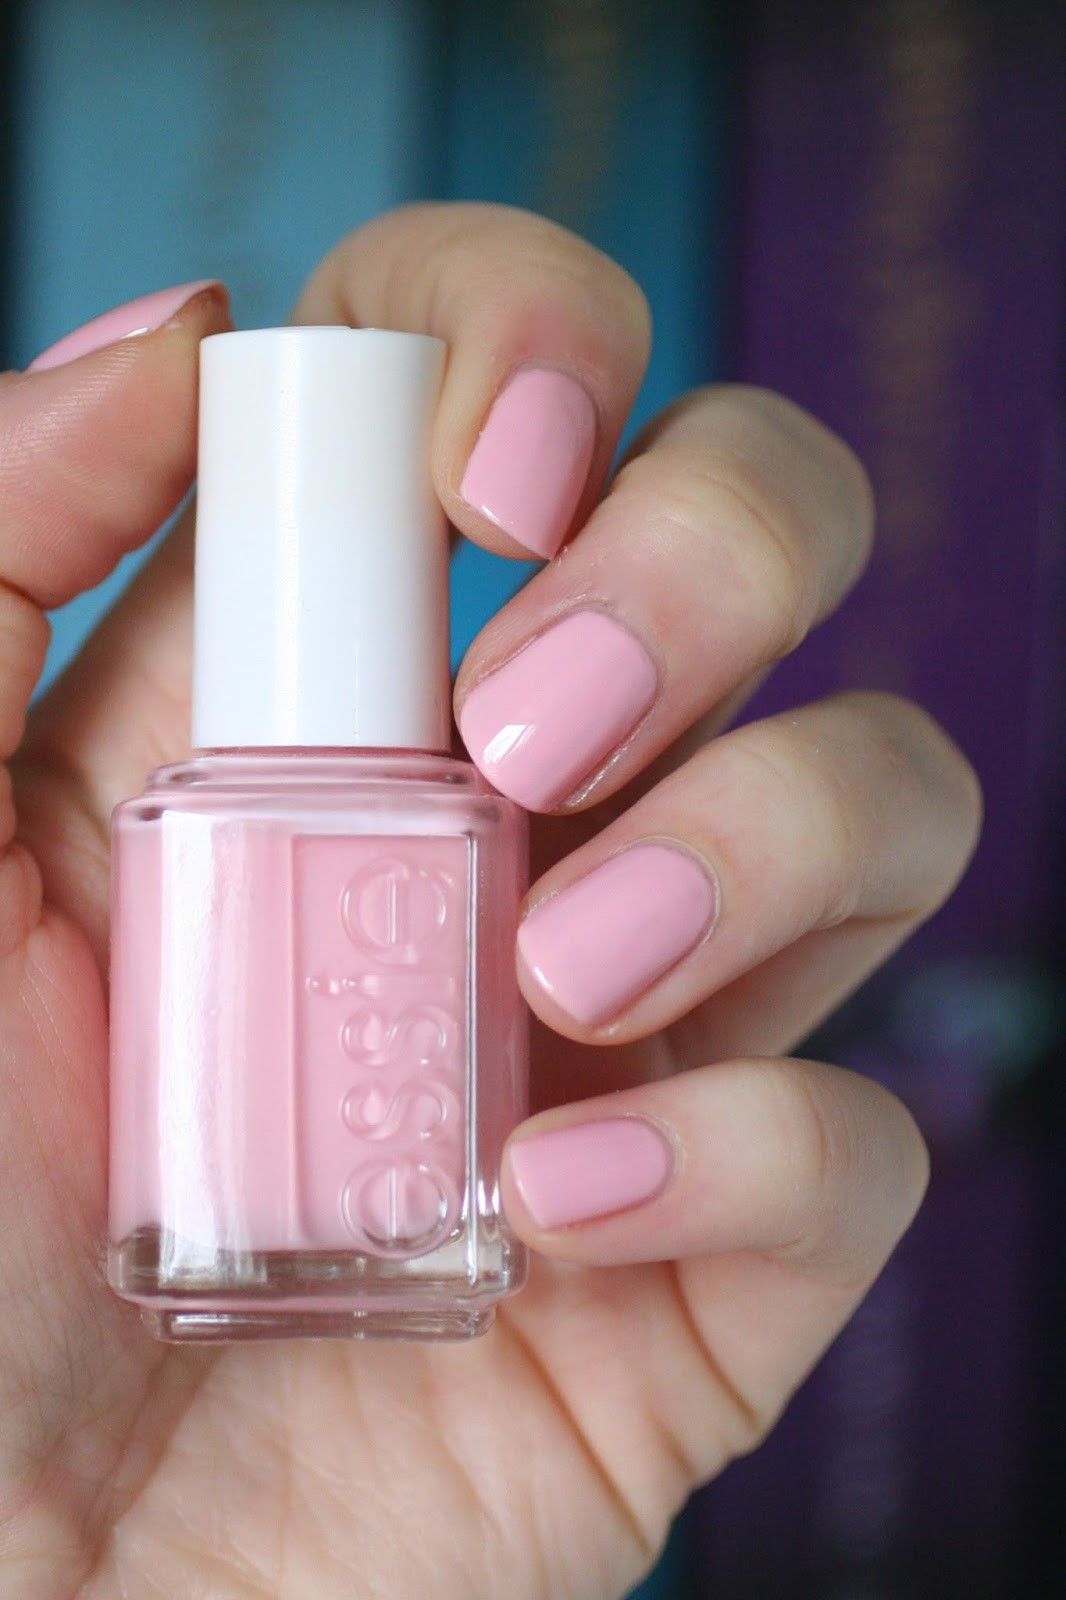 Essie Nail Colors
 The Best Selling Essie Polishes of All Time with Swatches